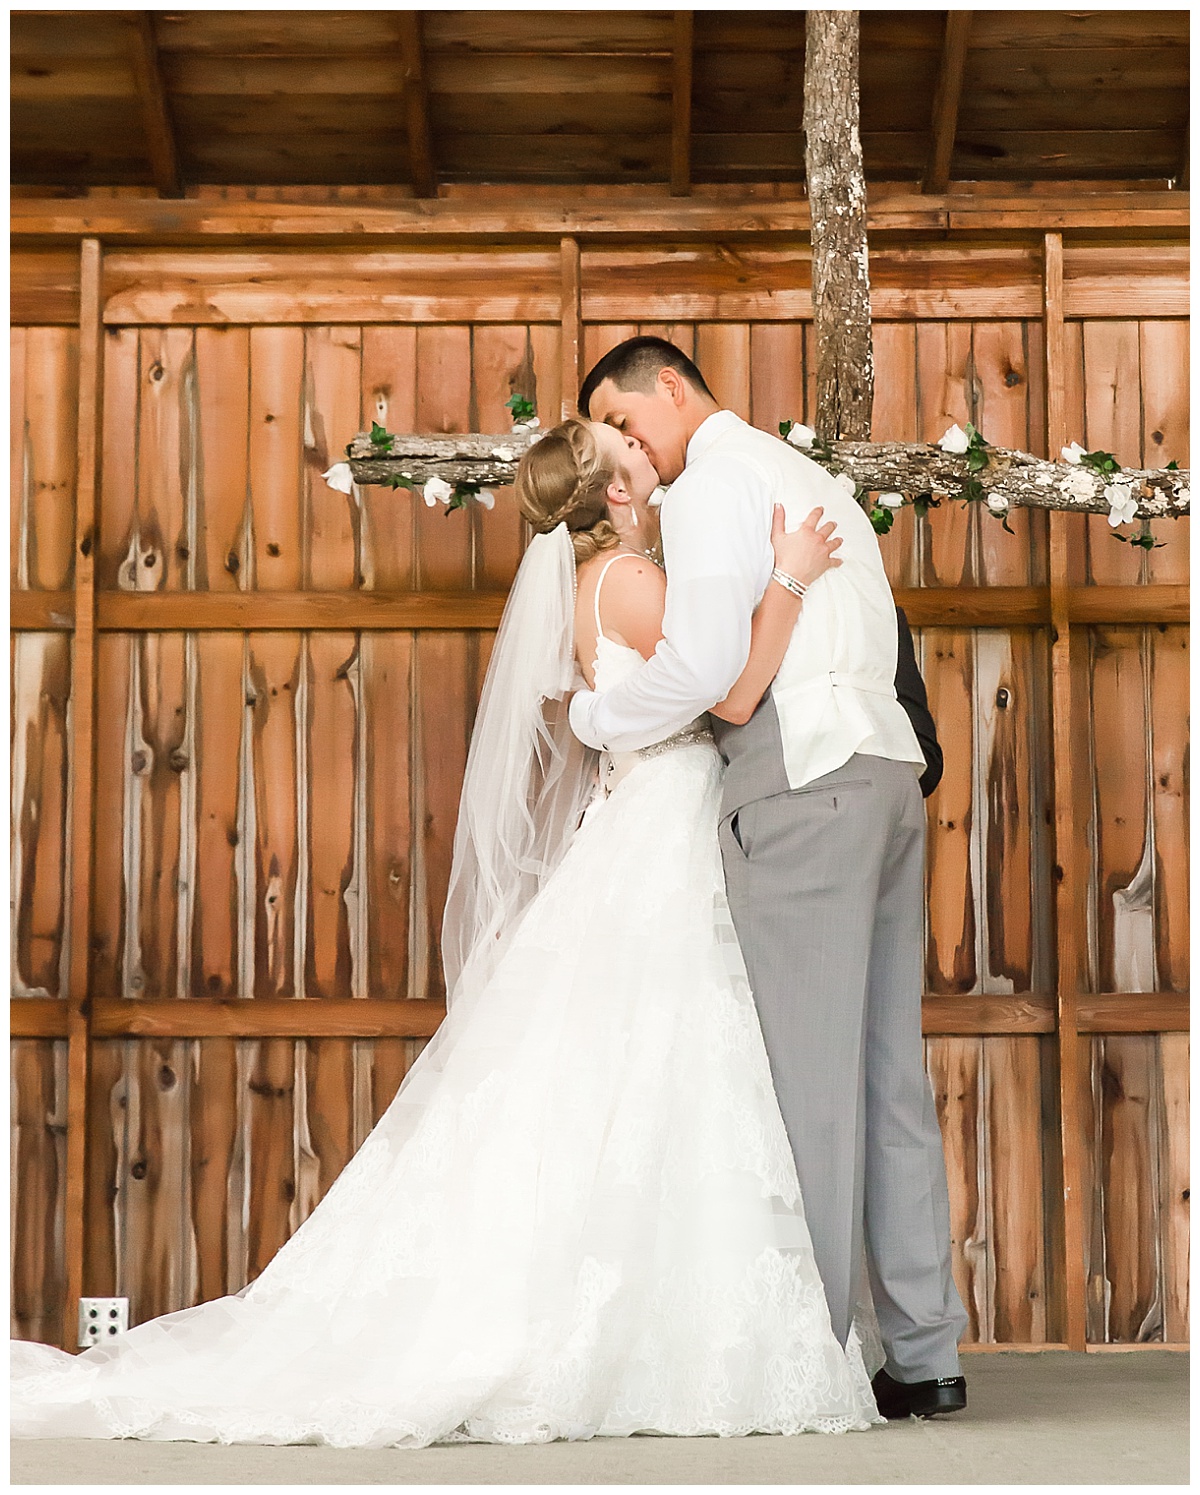 The Kiss Wedding ceremony bride and groom at rustic venue